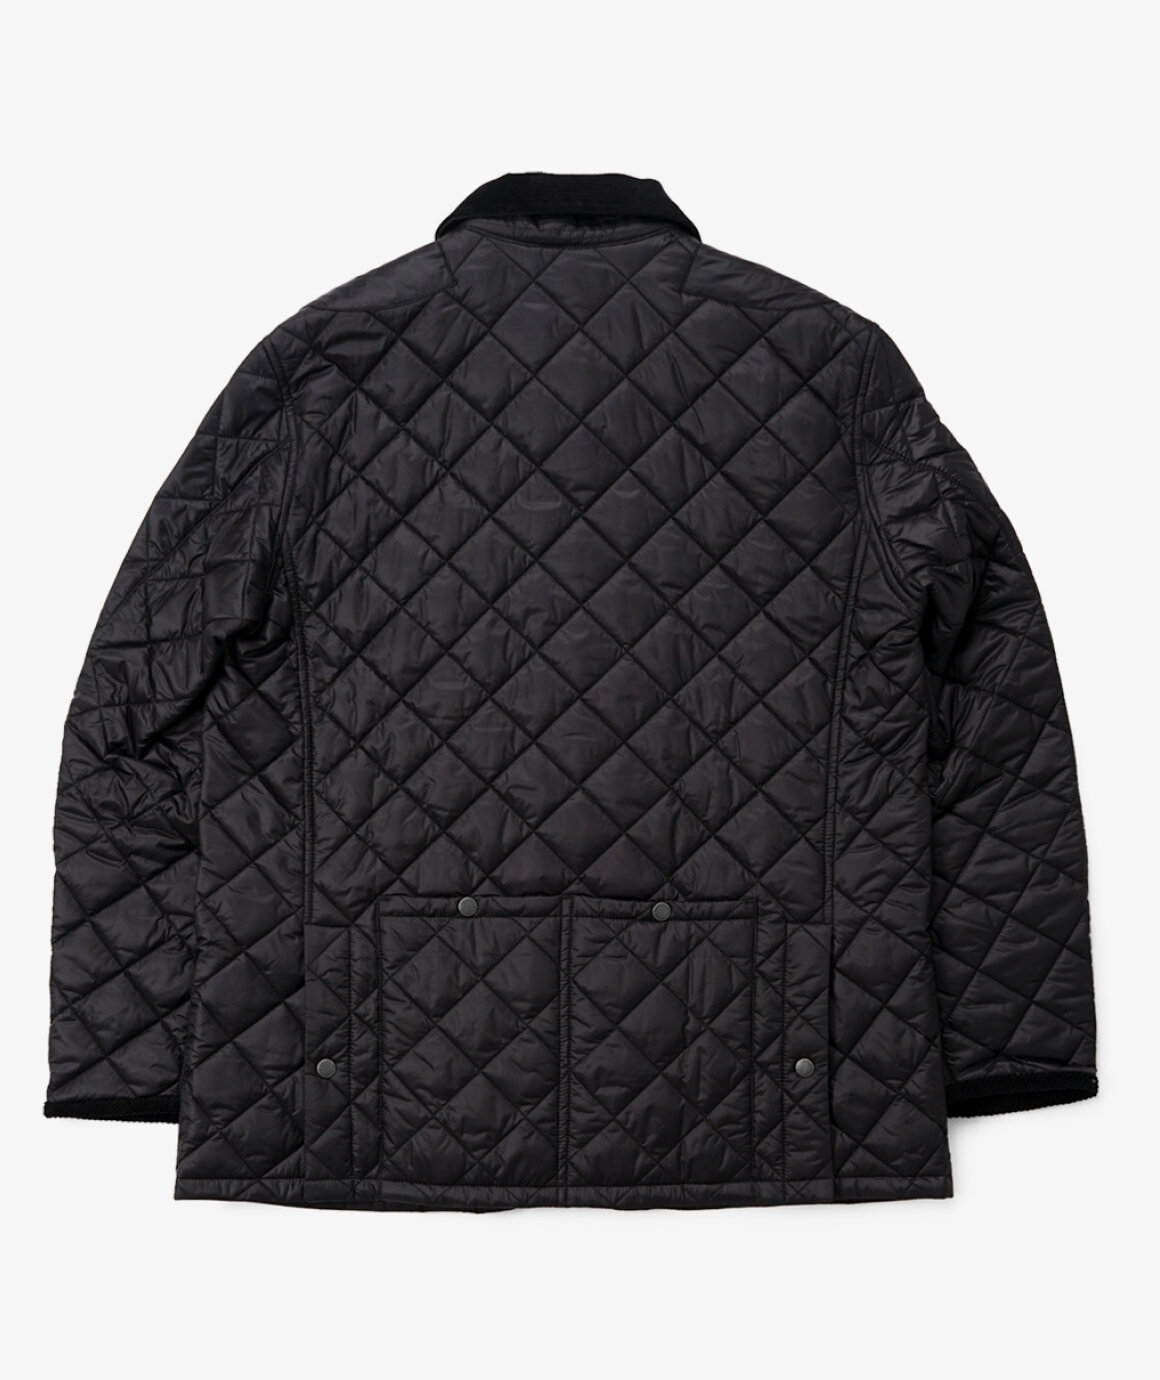 Norse Store | Shipping Worldwide - Barbour x Engineered Garments Staten ...